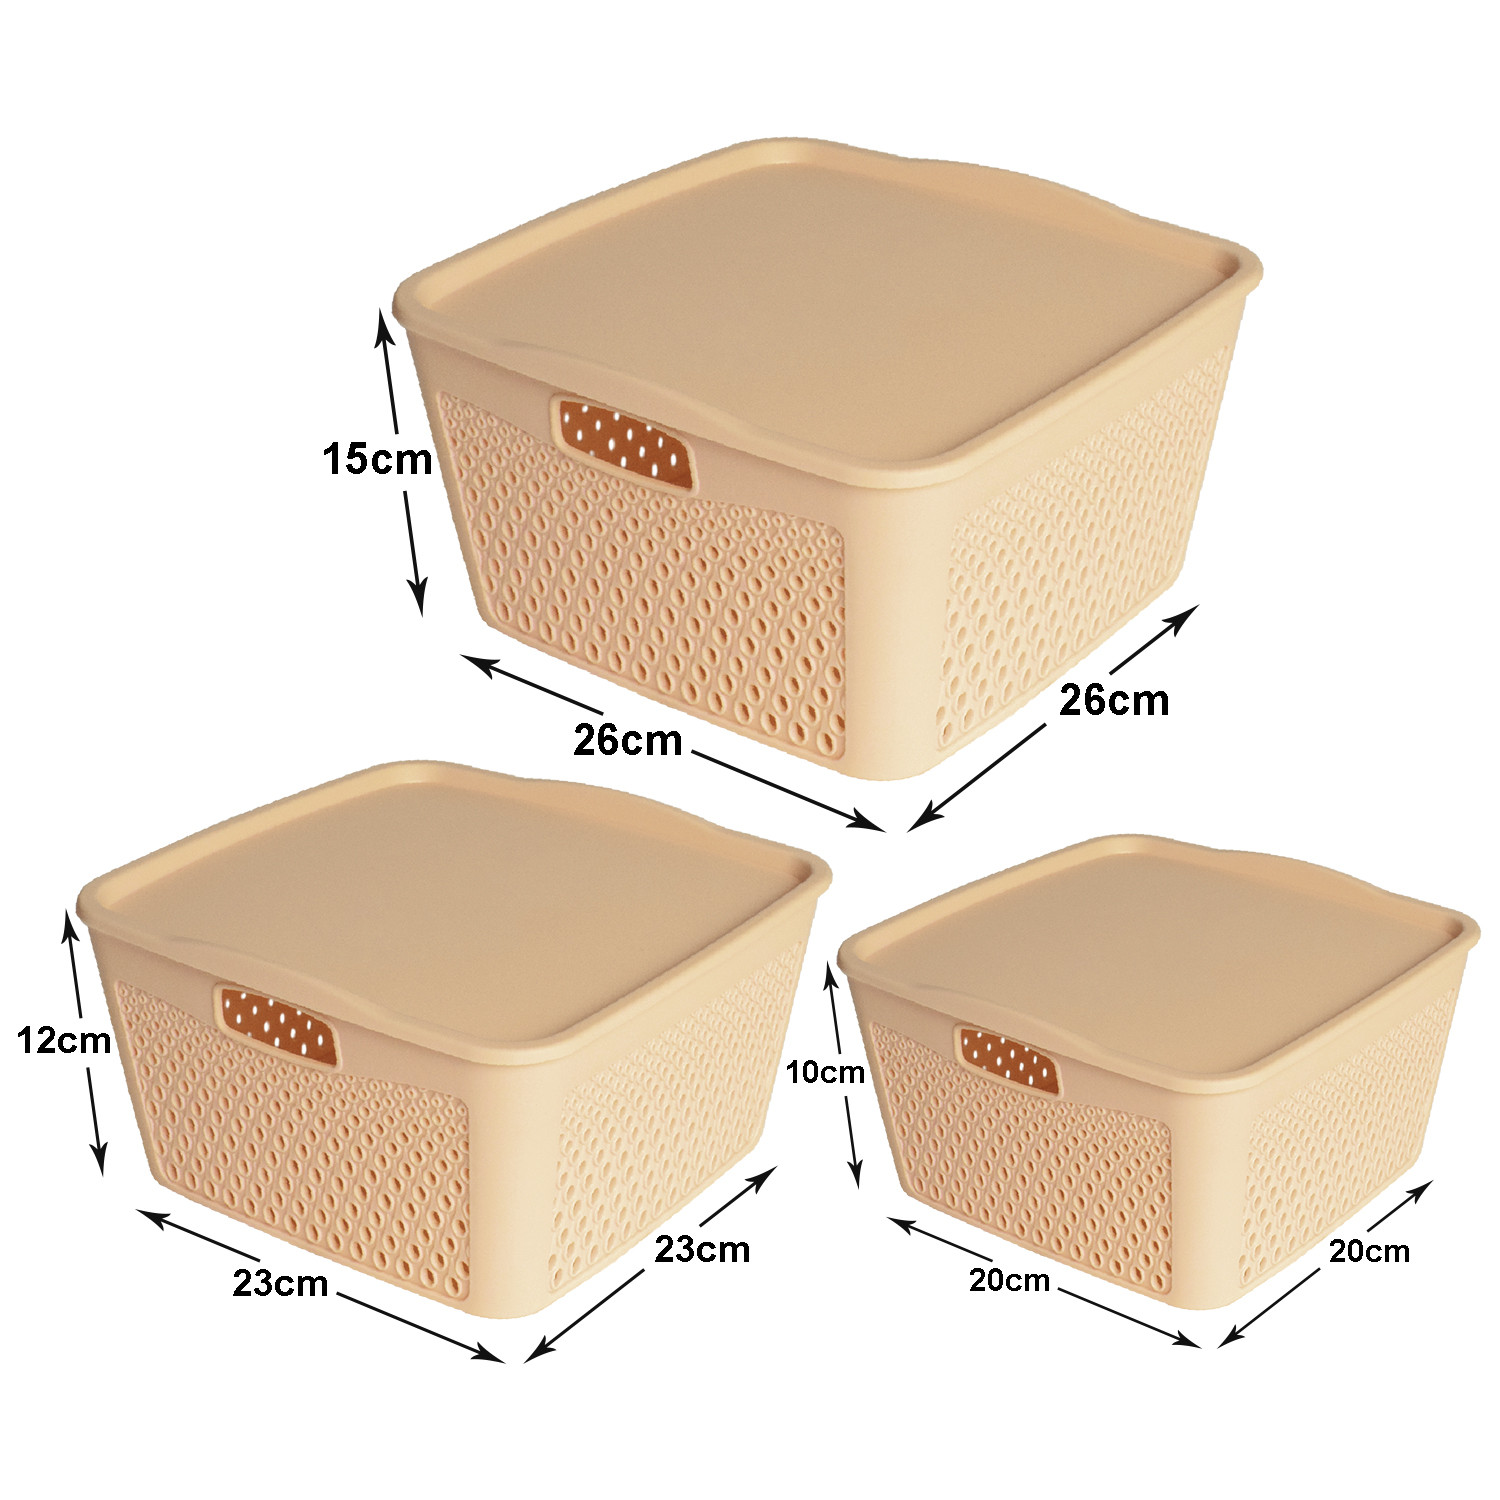 Kuber Industries Netted Design Unbreakable Multipurpose Square Shape Plastic Storage Baskets with lid Small, Medium, Large Pack of 3 (Beige)